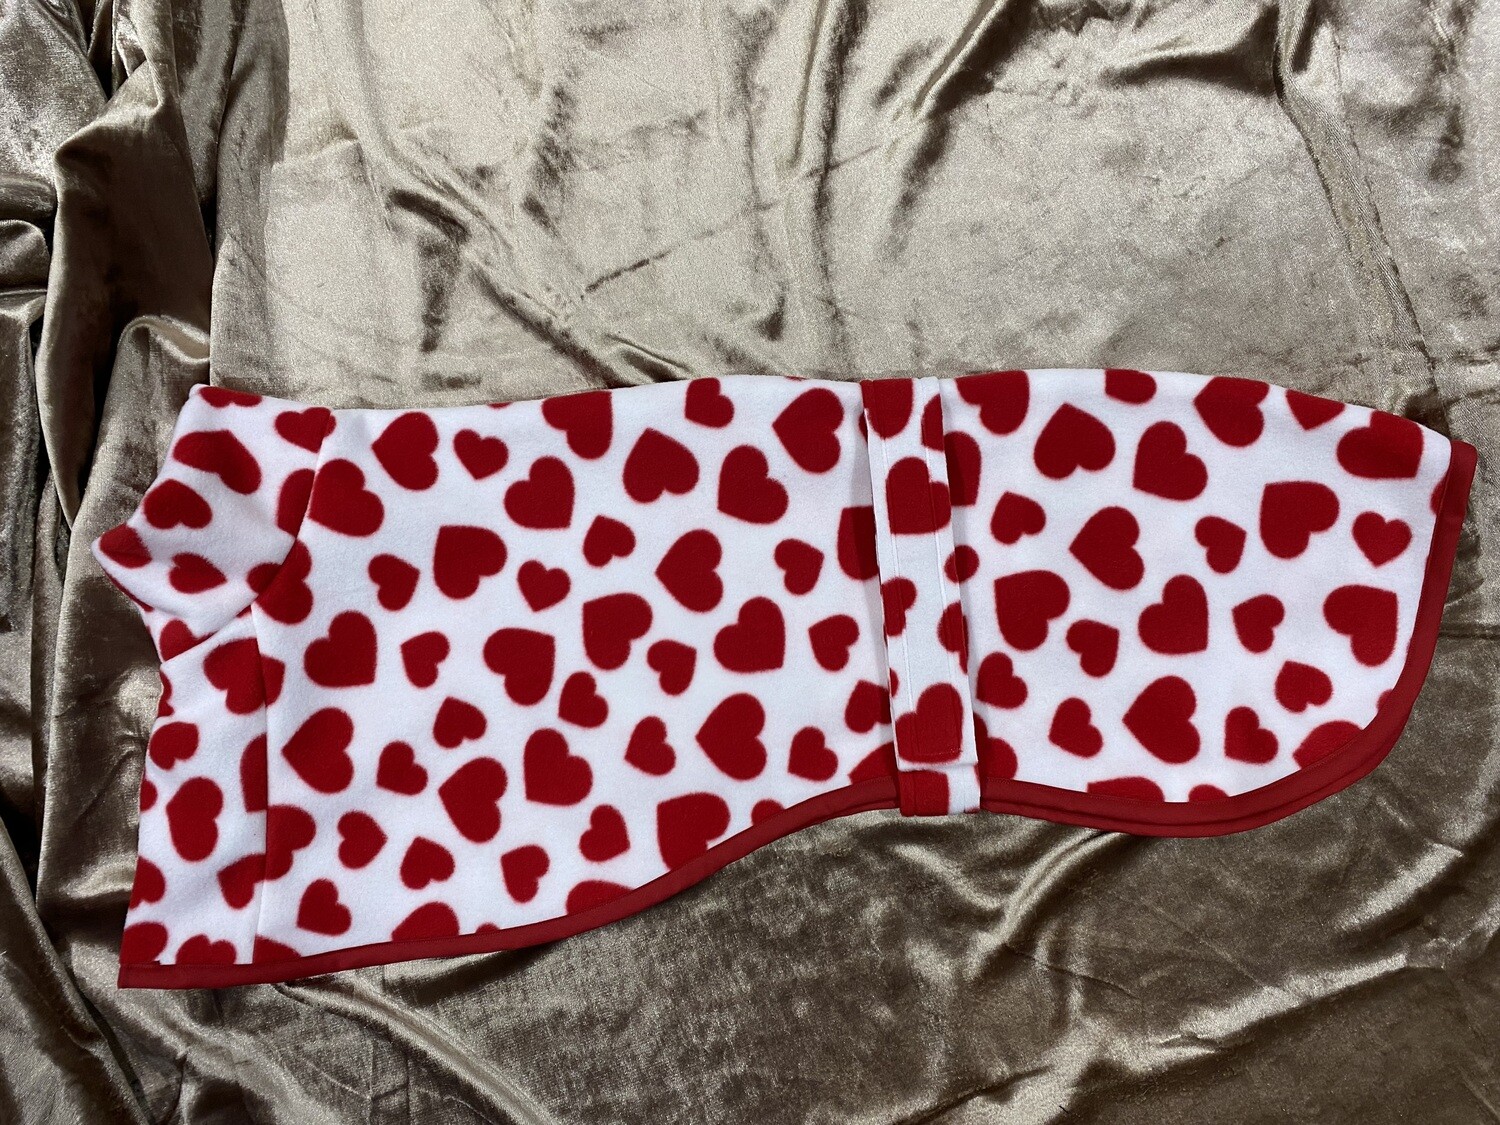 30" - Red Hearts on White  - CUT OUT AND READY TO SEW!!